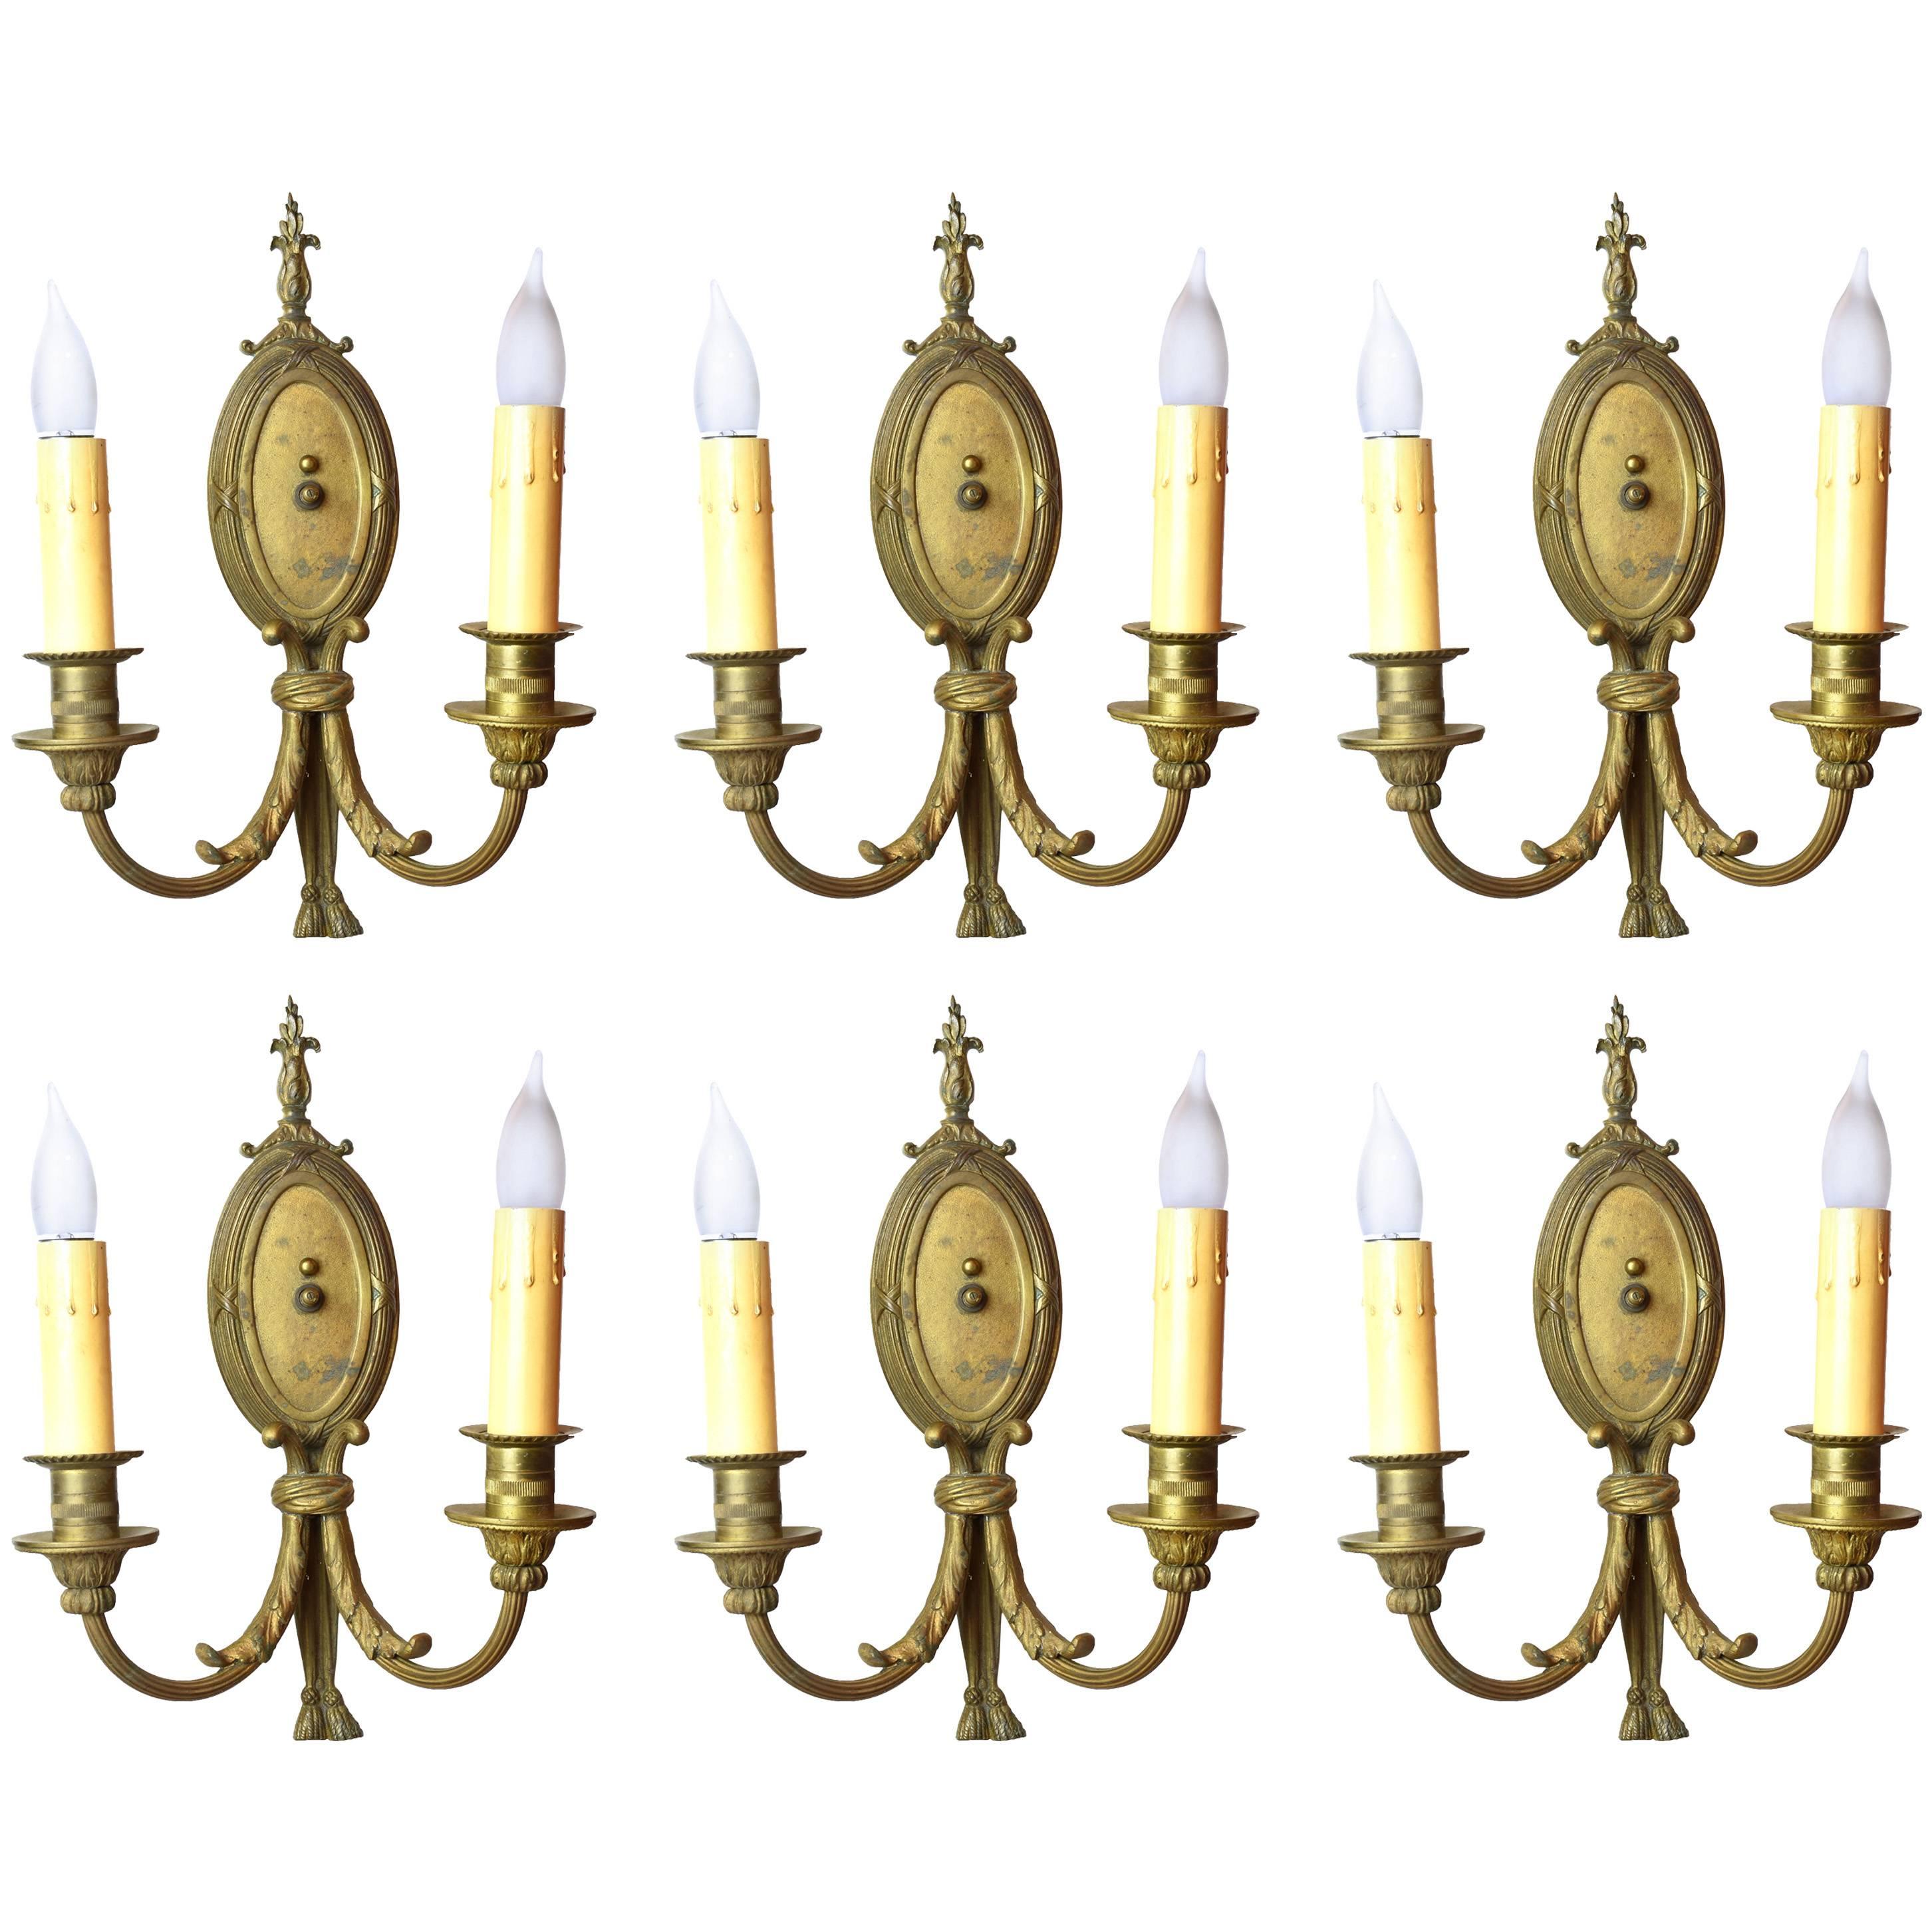 Cast Brass Two-Arm Early Federal Sconces